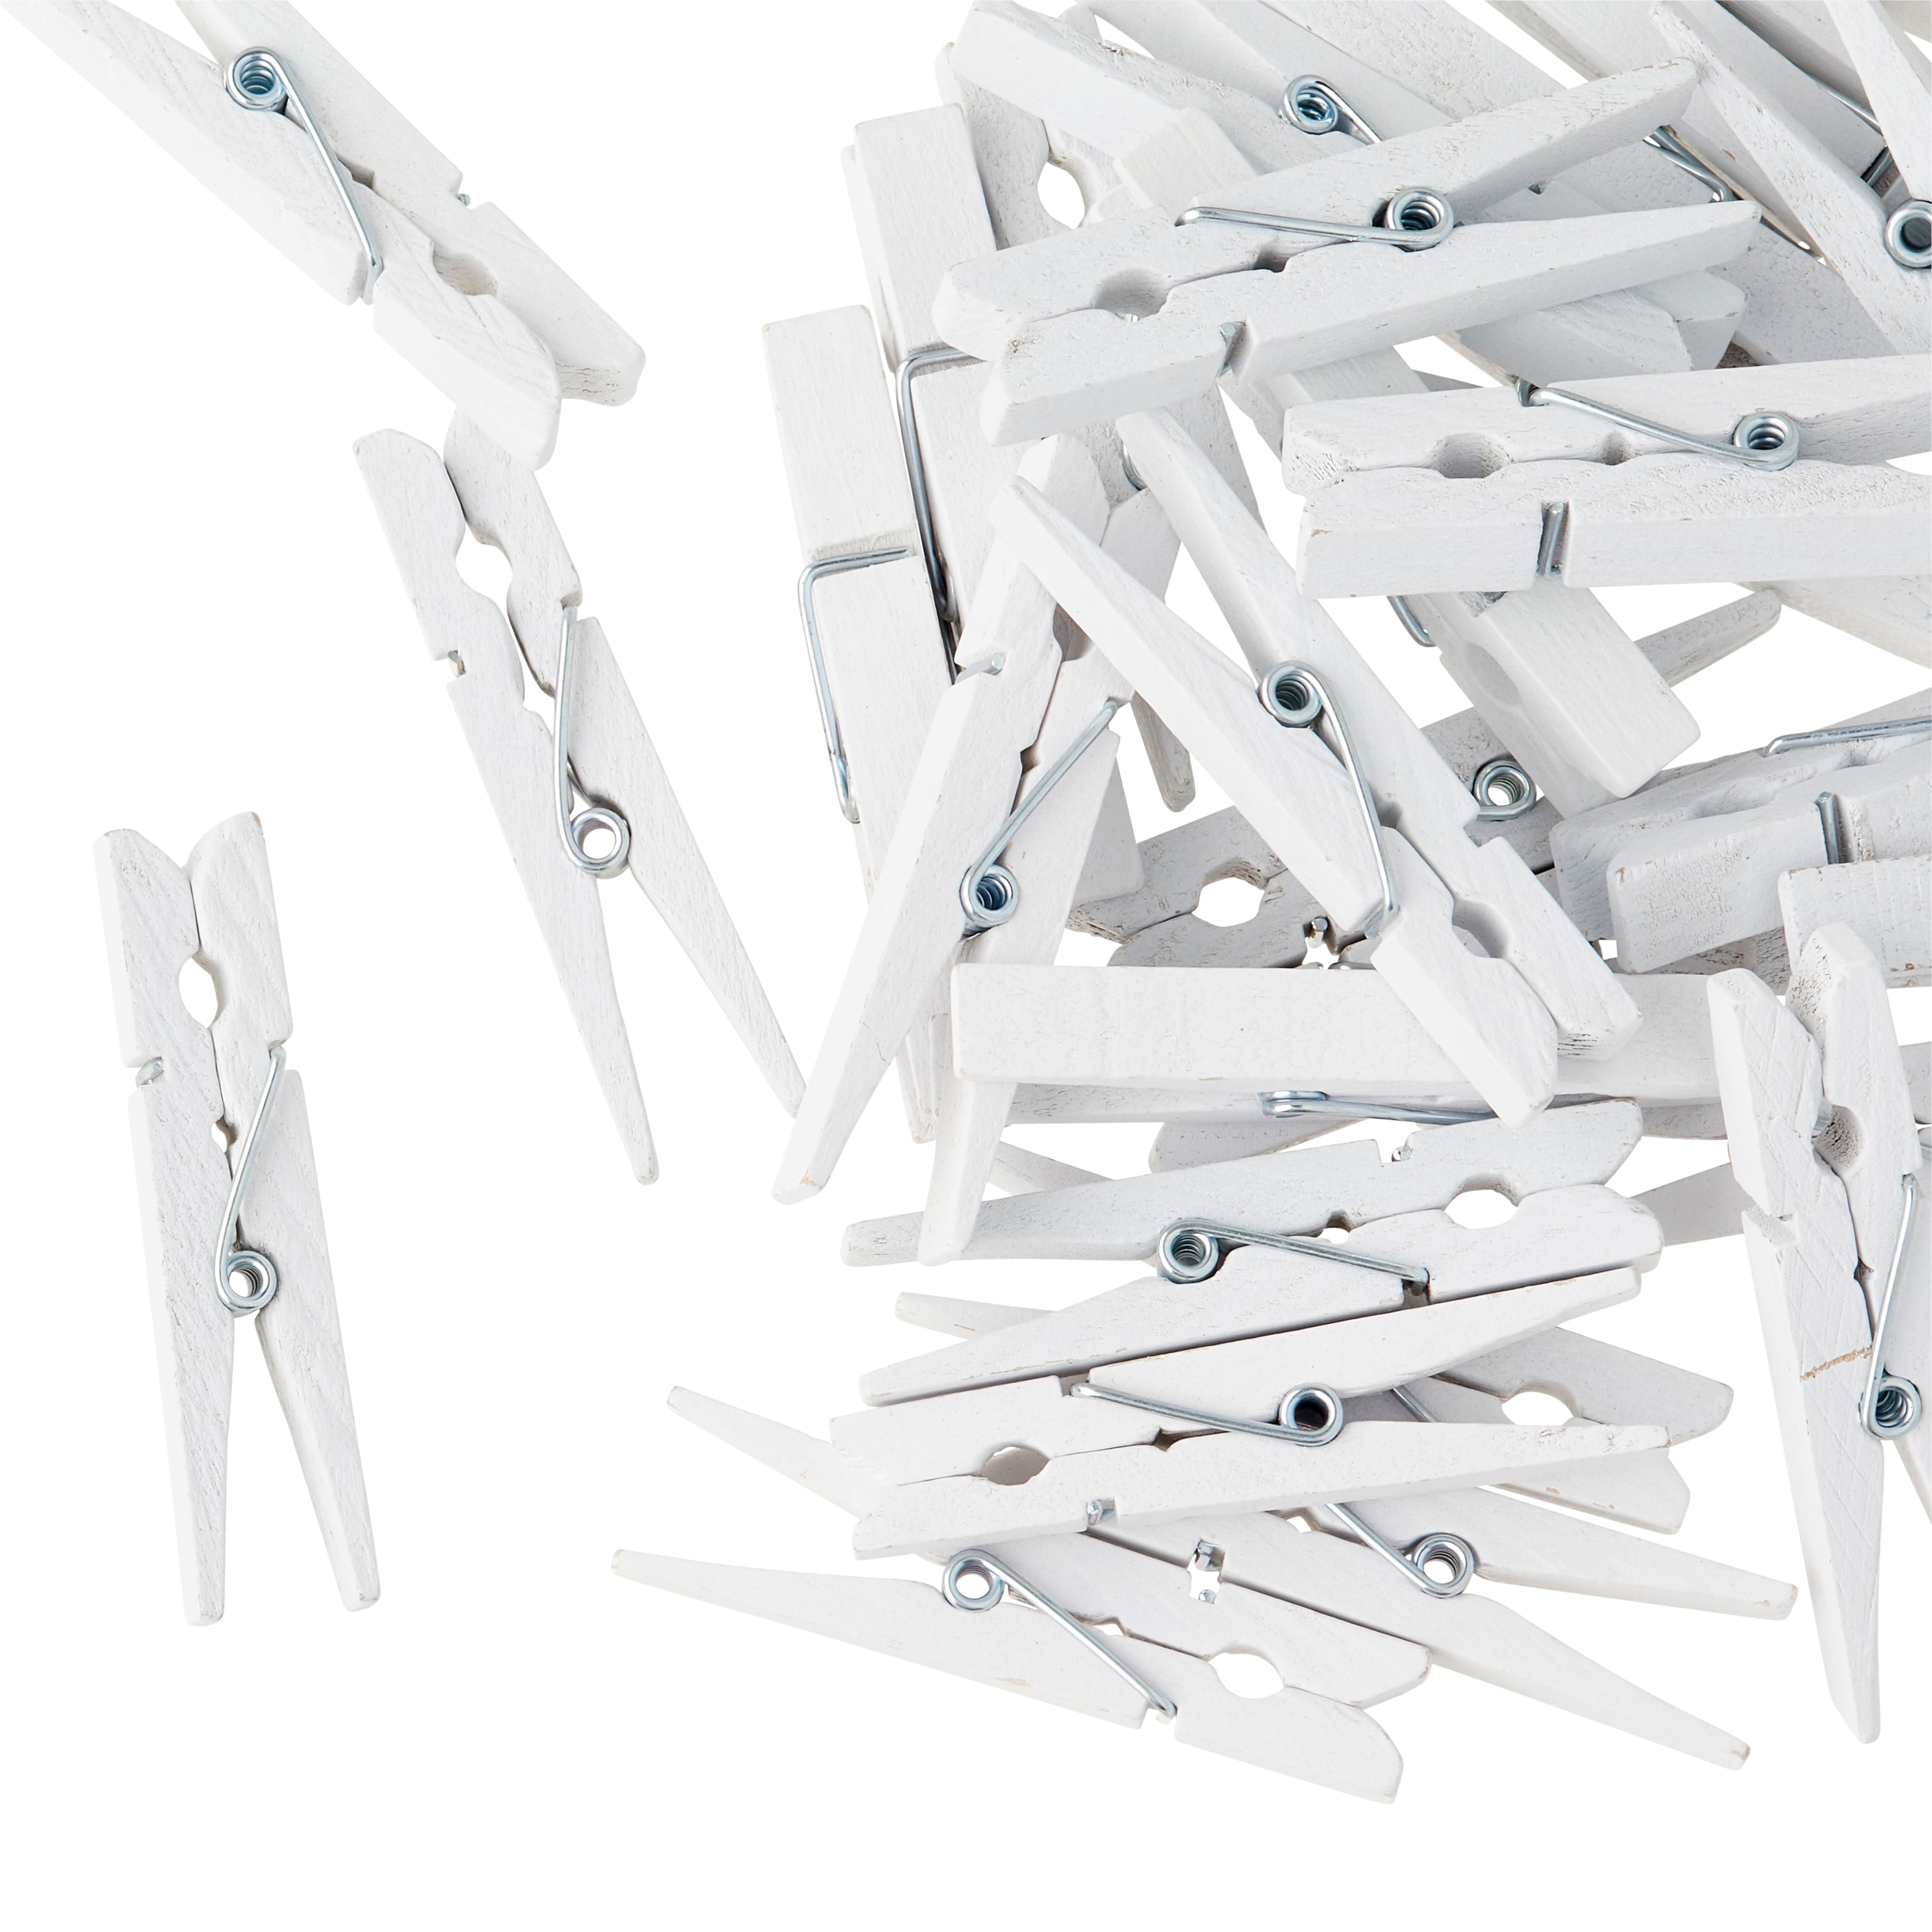 Medium Clothespin Embellishments by Recollections&#x2122;, White